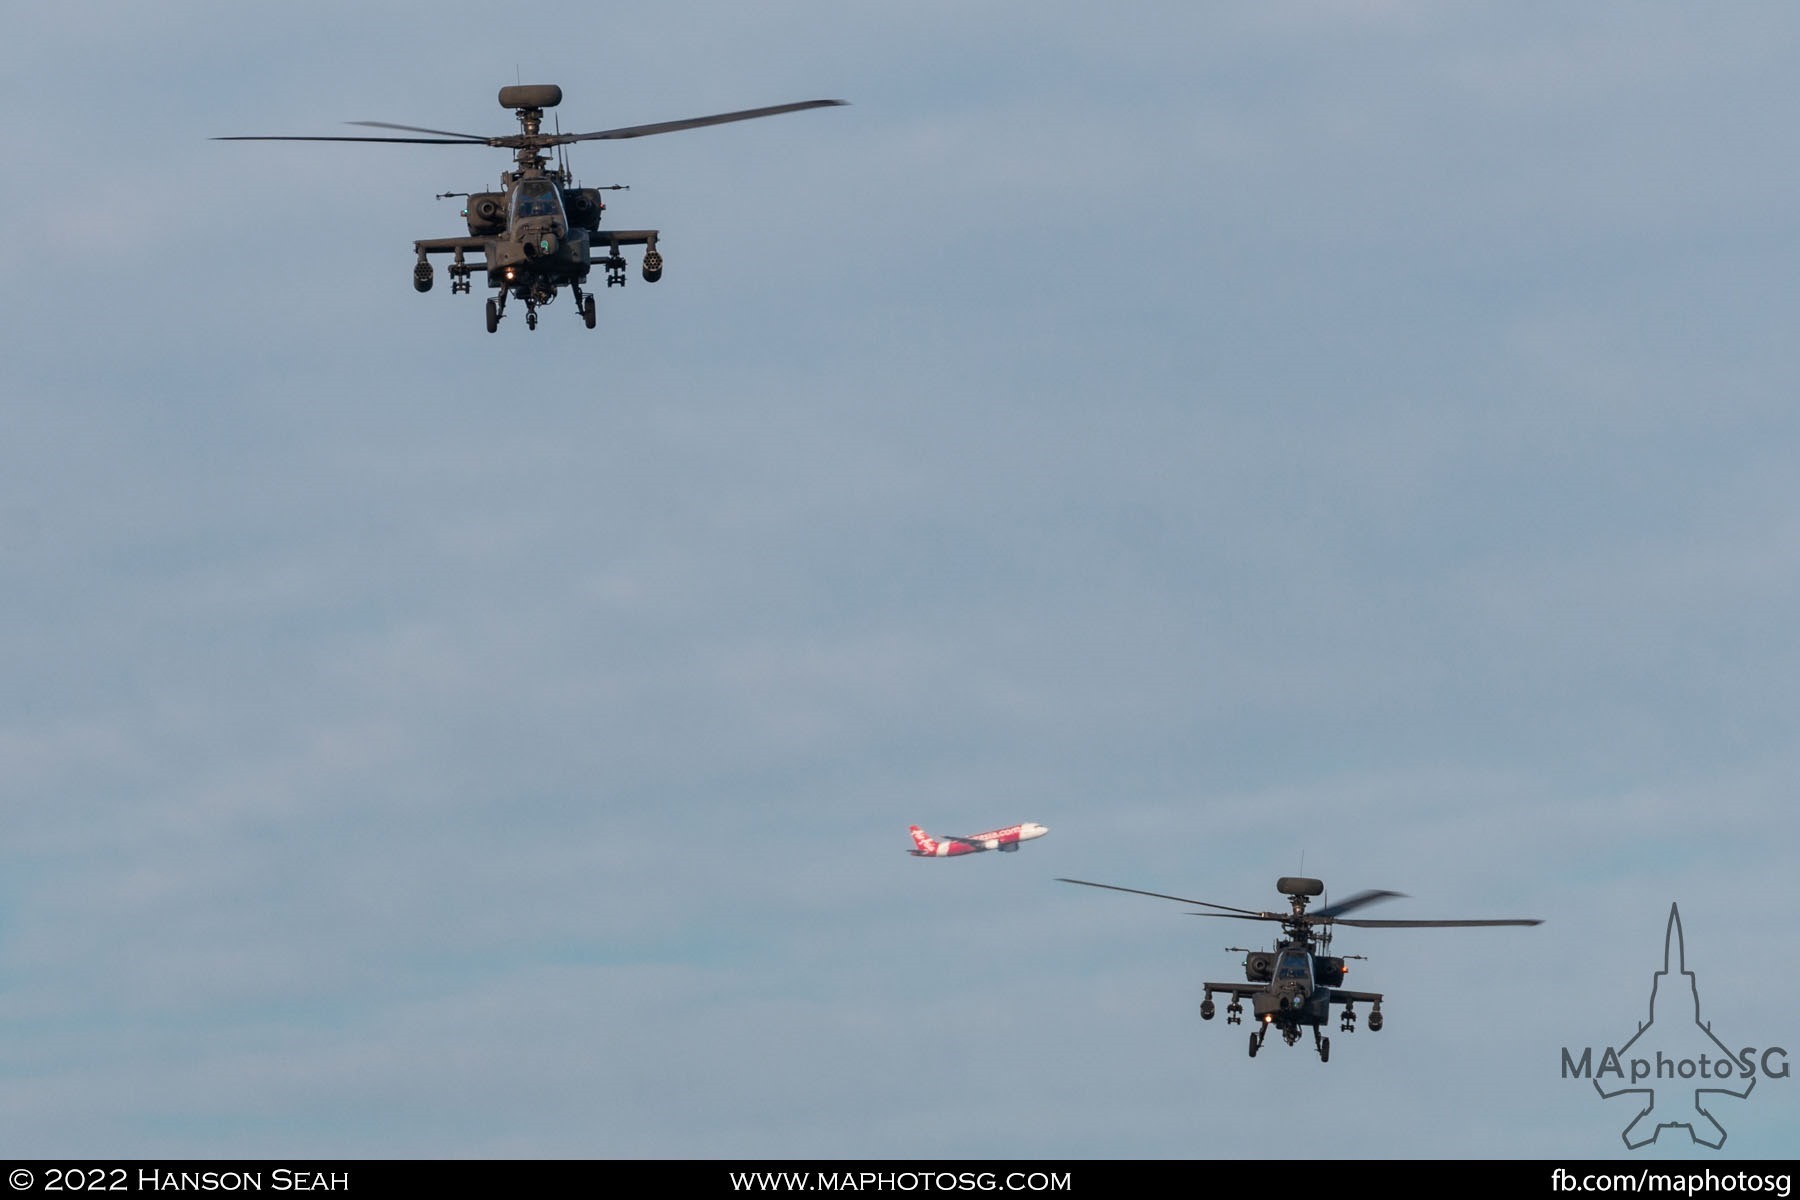 A pair of Apaches entring the show centre to start their segment